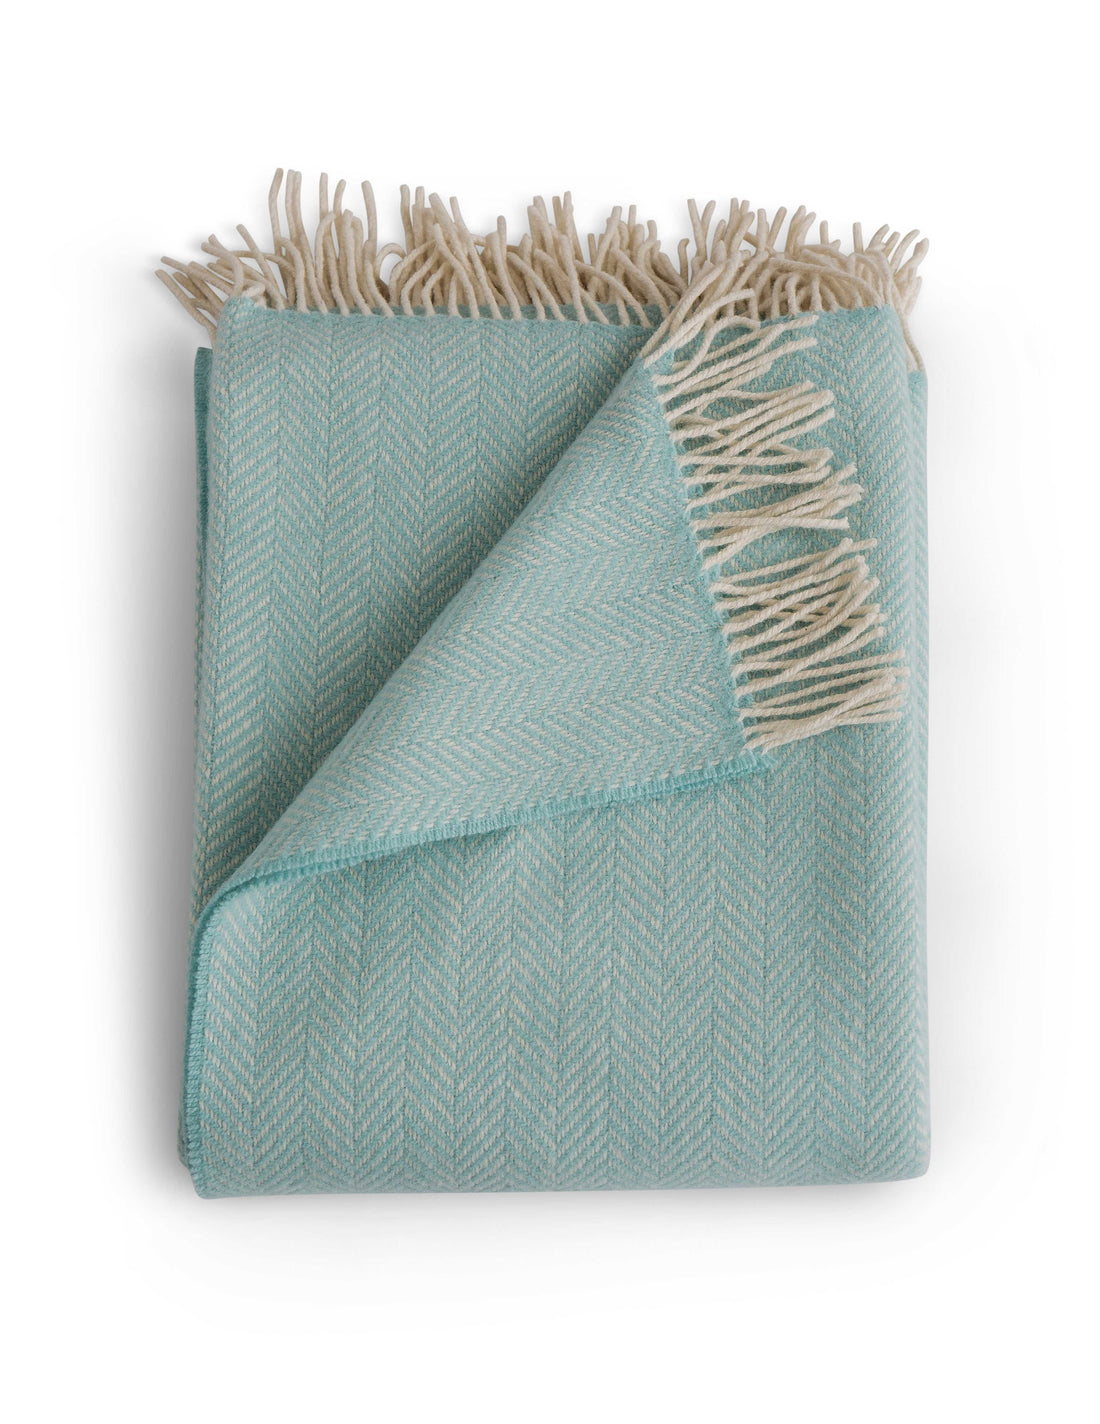 Folded Herringbone throw in Sea Foam, a cheerful teal colored throw with grey tassel detail. Timeless herringbone design. Super soft luster of cashmere. cozy comfort of merino wool. A chunky and cuddly classic. 95% Merino Lambswool and 5% Cashmere. Woven in Ireland.